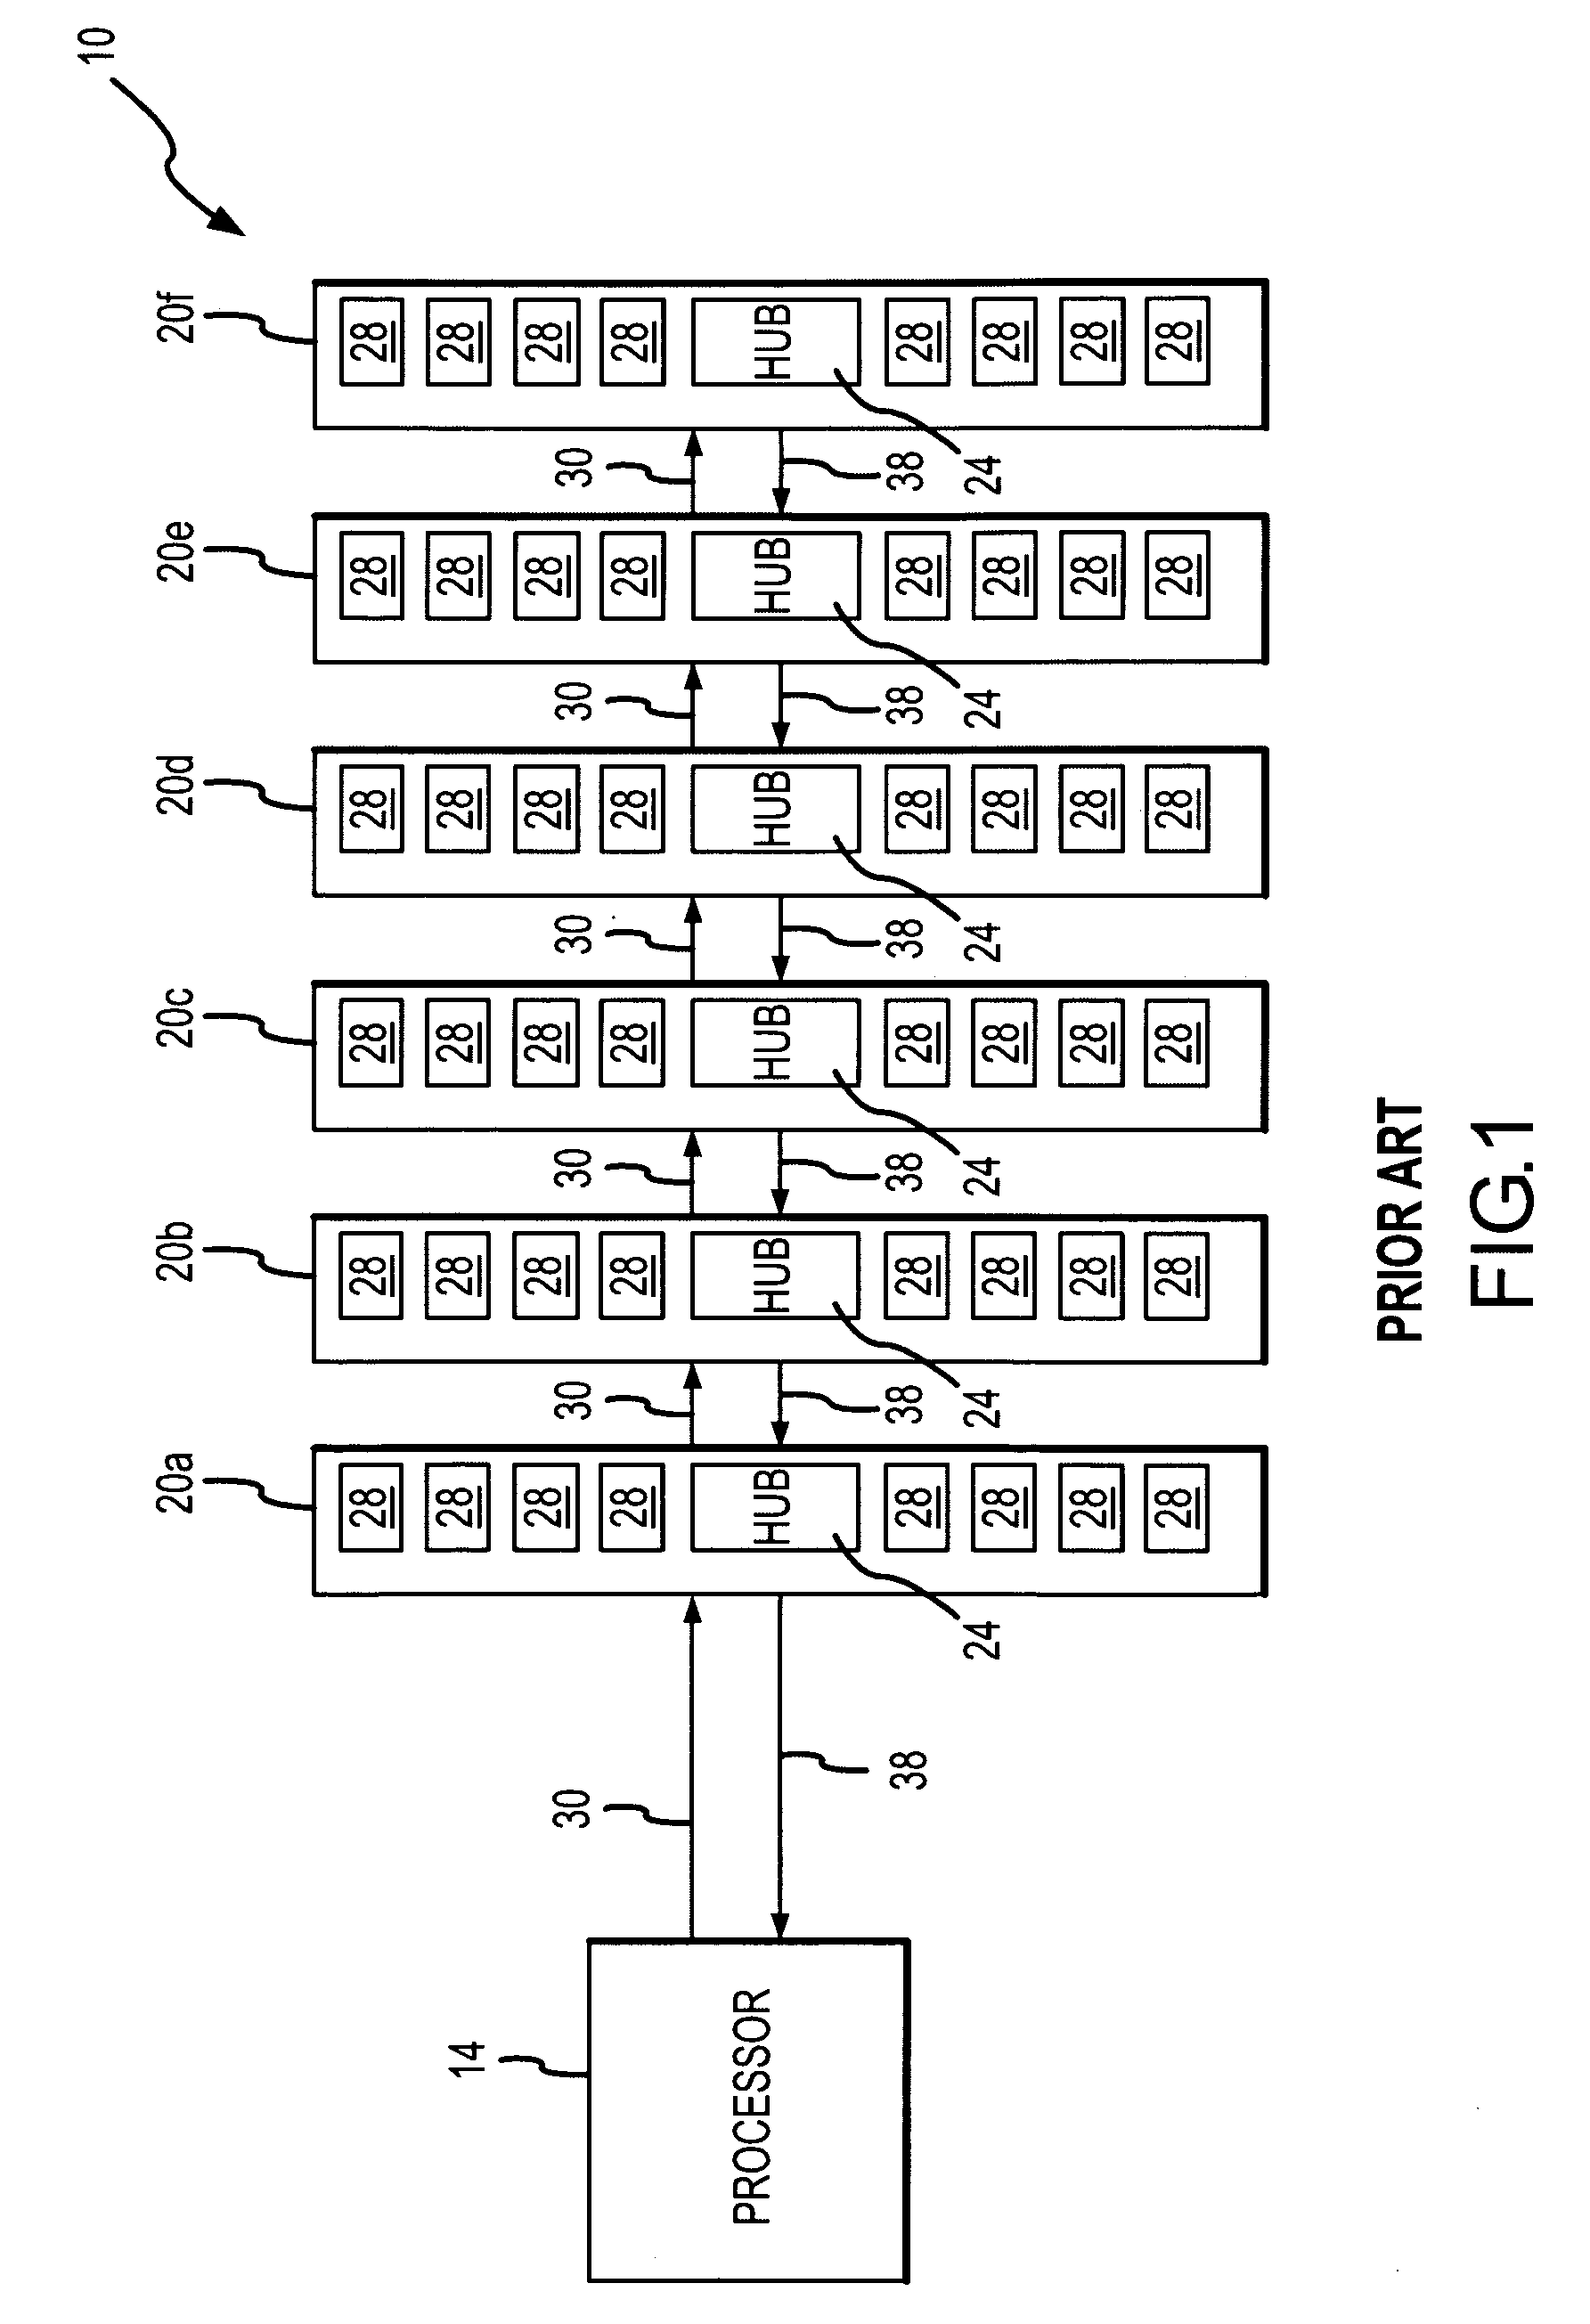 Multiple processor system and method including multiple memory hub modules